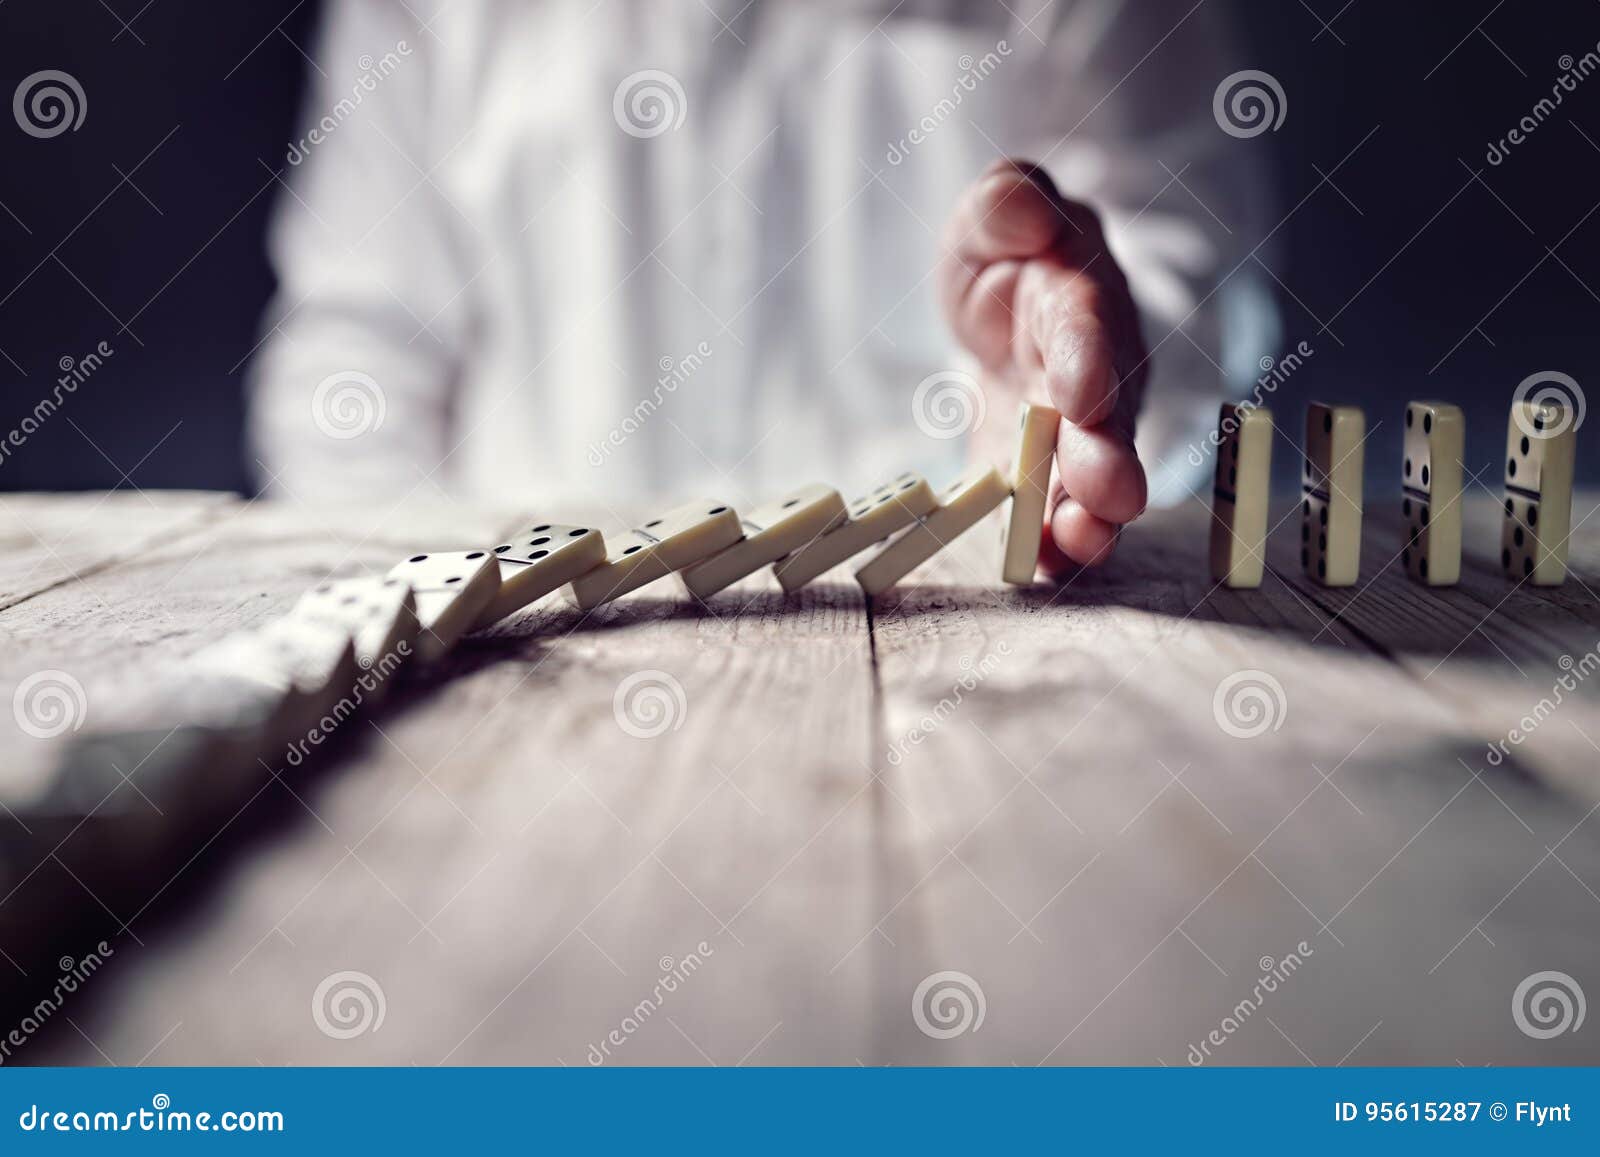 stop the domino effect concept for business solution and intervention